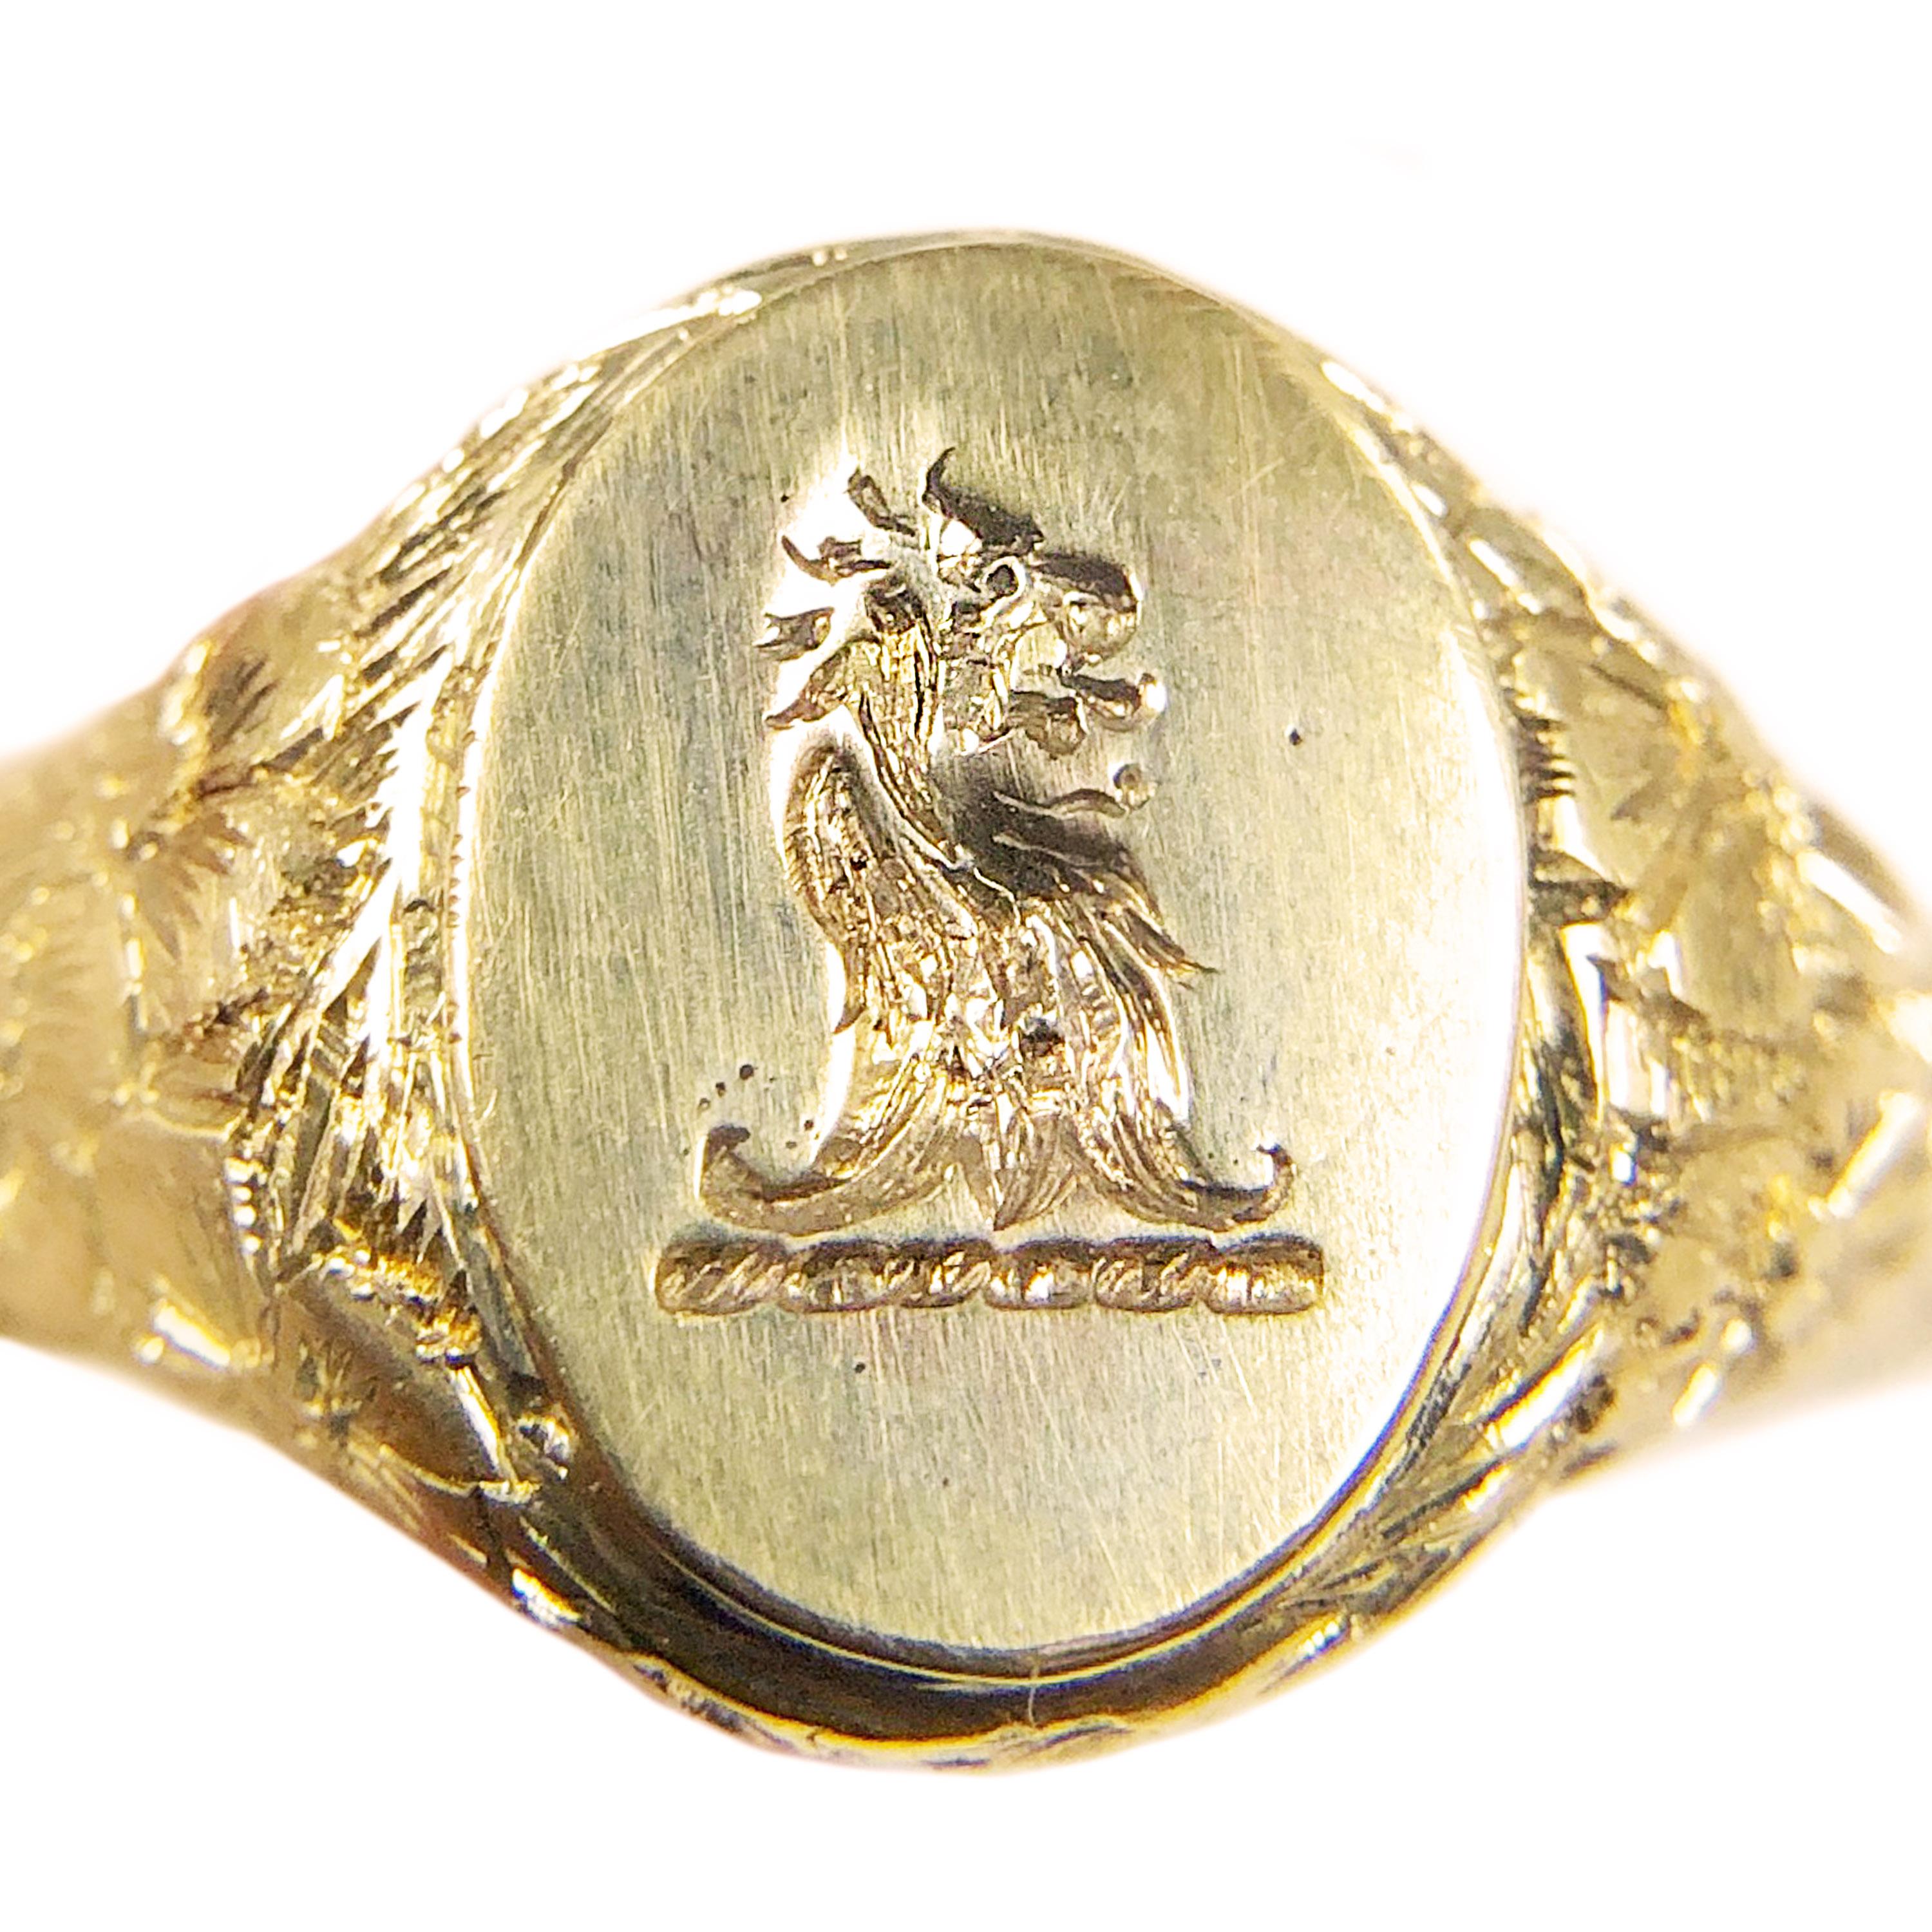 Tiffany & Company dated 1901 14K Yellow Gold Signet Ring. A heavy solid ring weighing 15 Grams with deep crisp hand chasing. The top of the ring with an intaglio signet measures 1/2 x 1/2 inch. Excellent condition overall and is a finger size 9 1/2. 